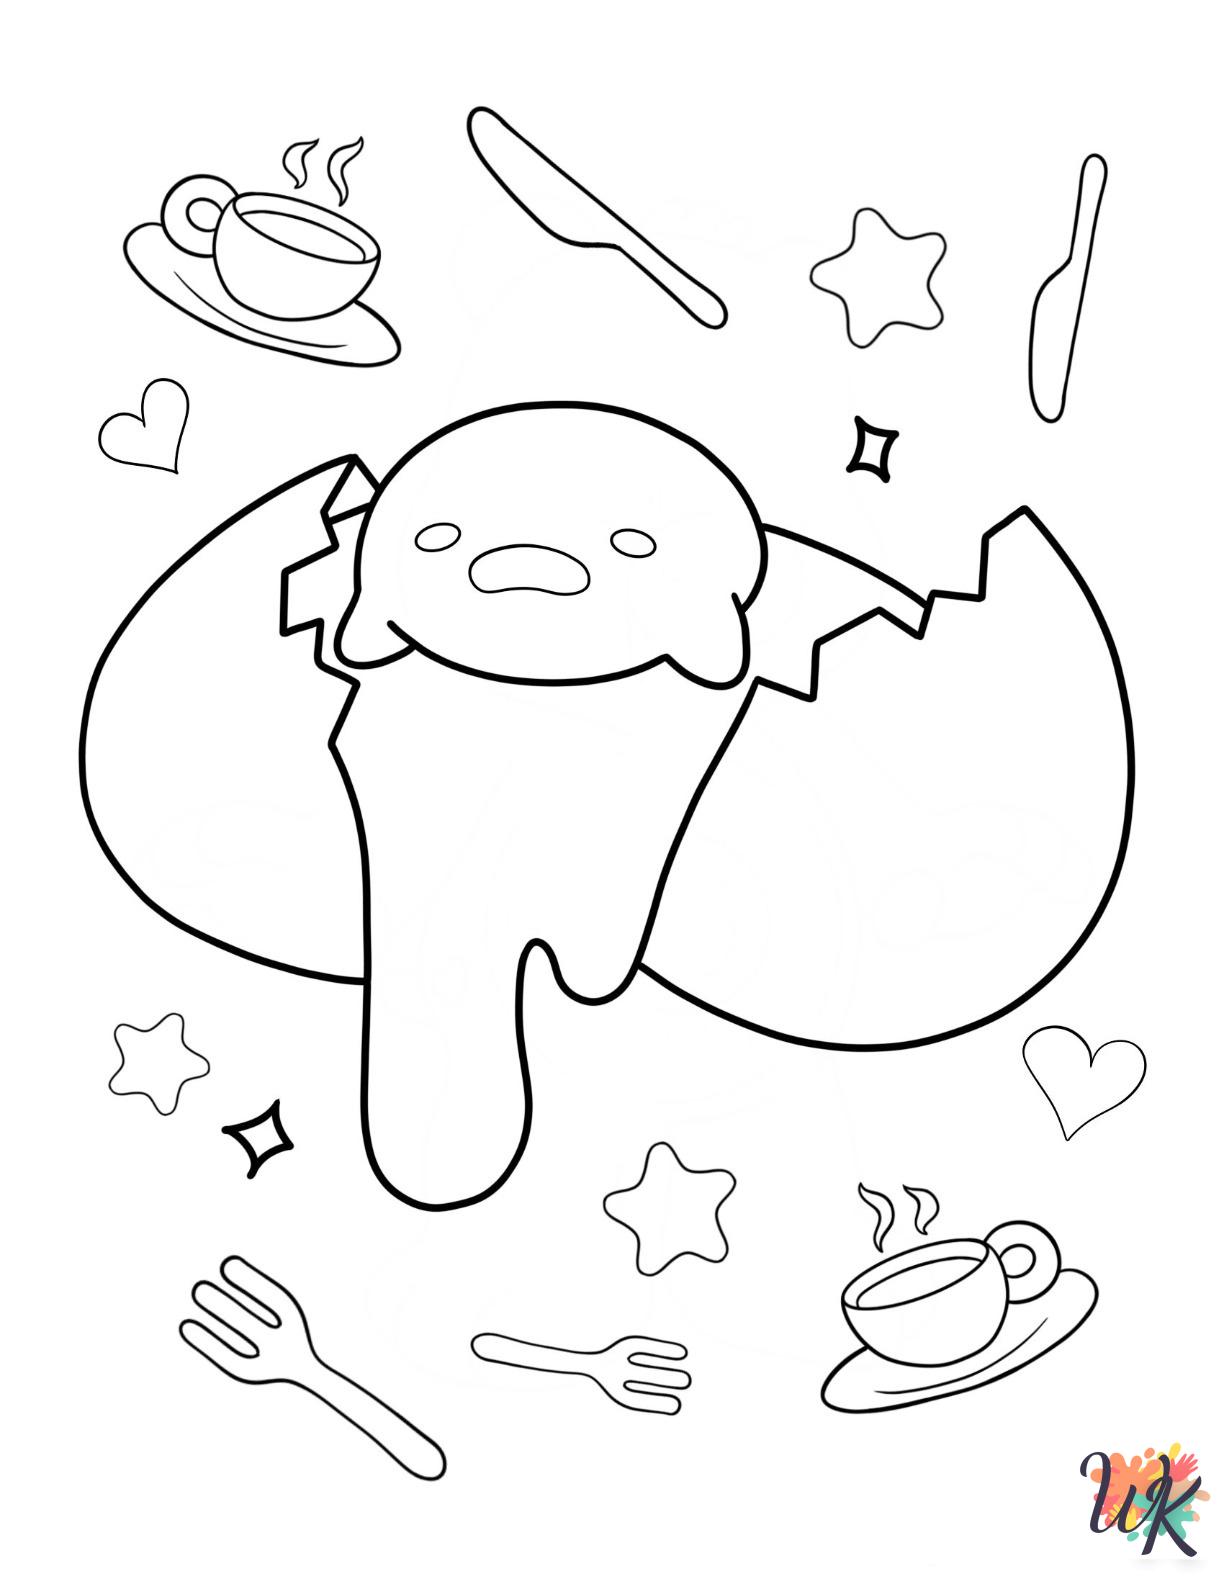 Gudetama coloring pages for adults